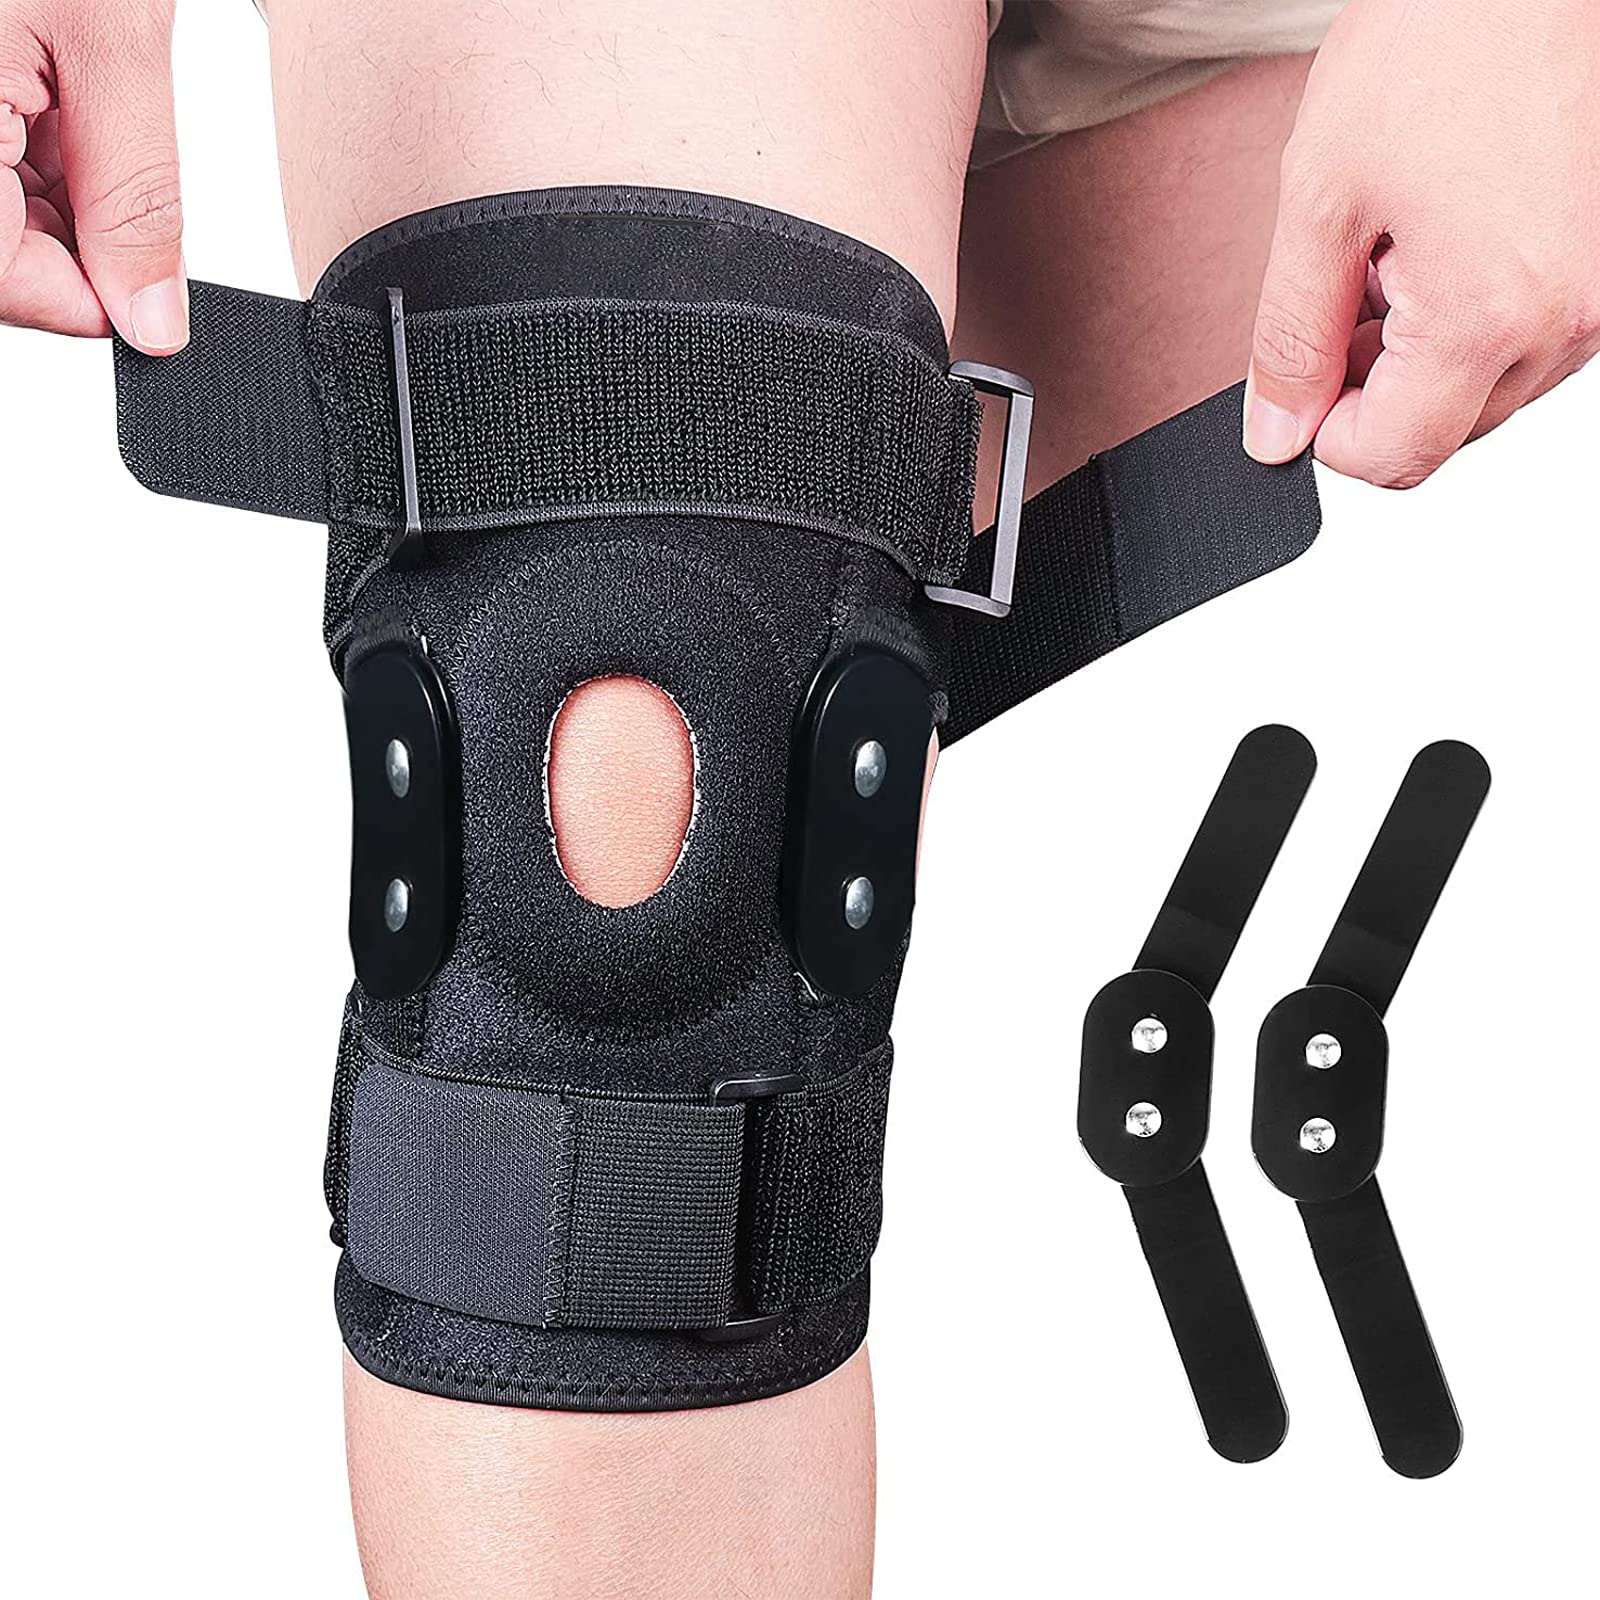 Hinged Knee Brace, Adjustable Knee Support Wrap for Men&Women, Pain Relief  Swelling and Inflammation, Patellar Tendon Support Sleeve for Helping